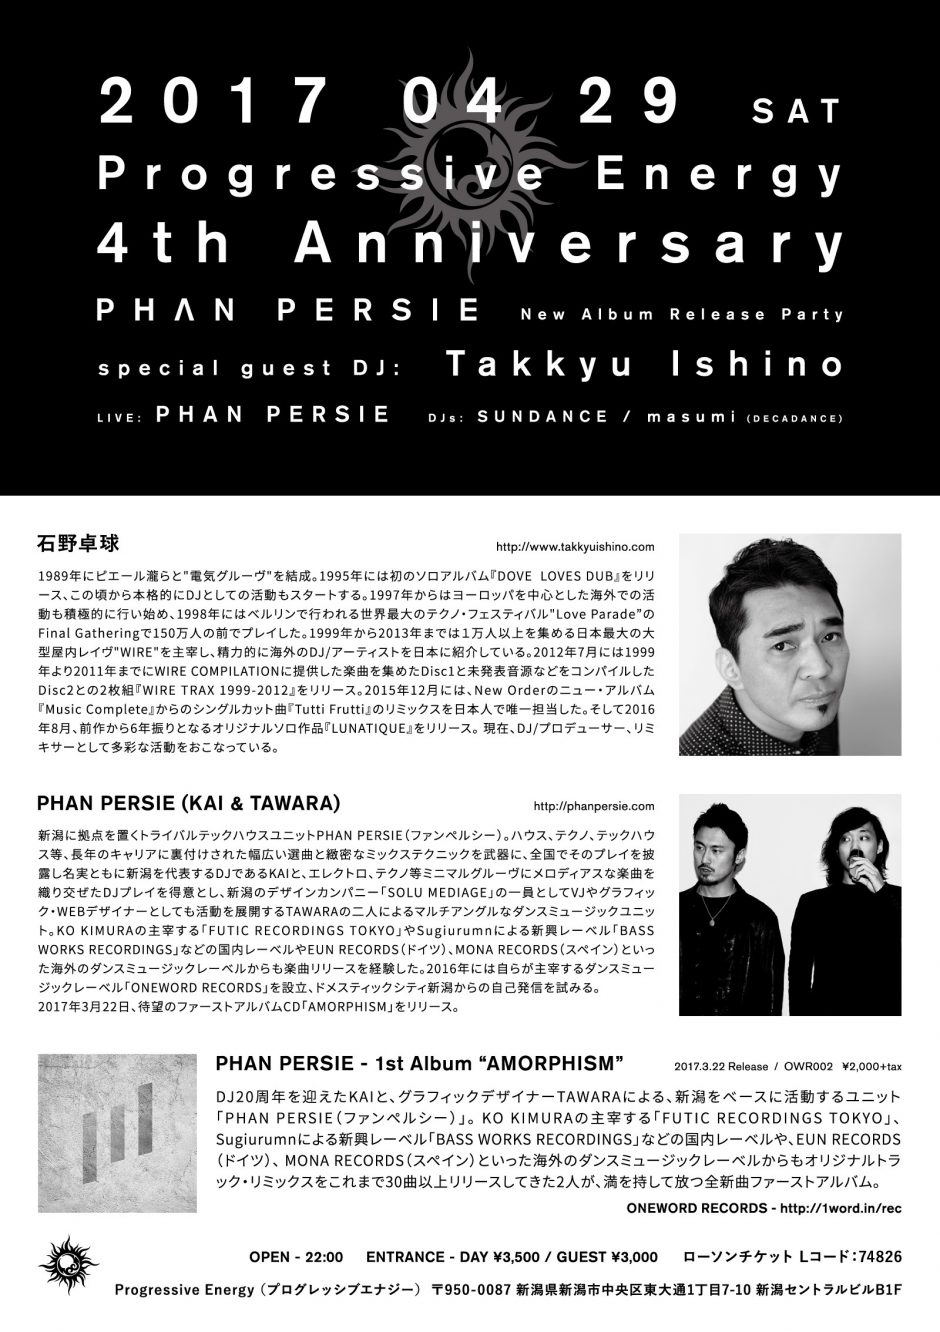 2017.4.29 SAT – PHAN PERSIE : LIVE@Progressive Energy / Progressive Energy 4th Anniversary – PHAN PERSIE New Album Release Party / special guest: Takkyu Ishino